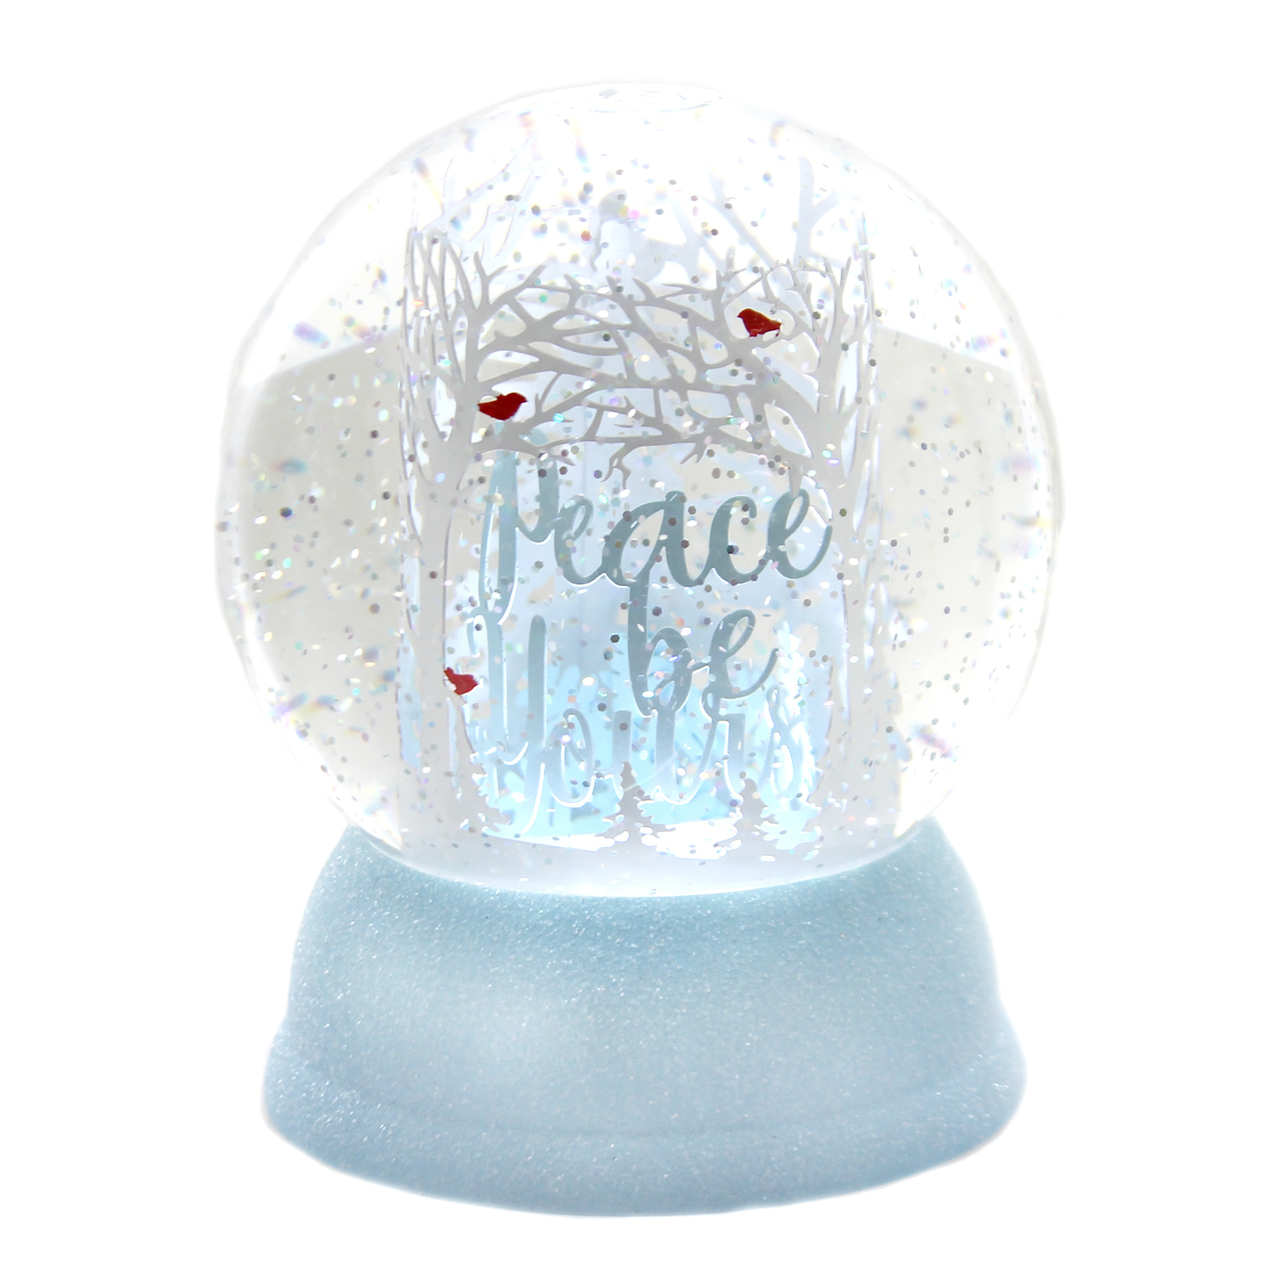 Roman - "Peace Be Yours" Glitter Snow Globe - Lighted - 131792